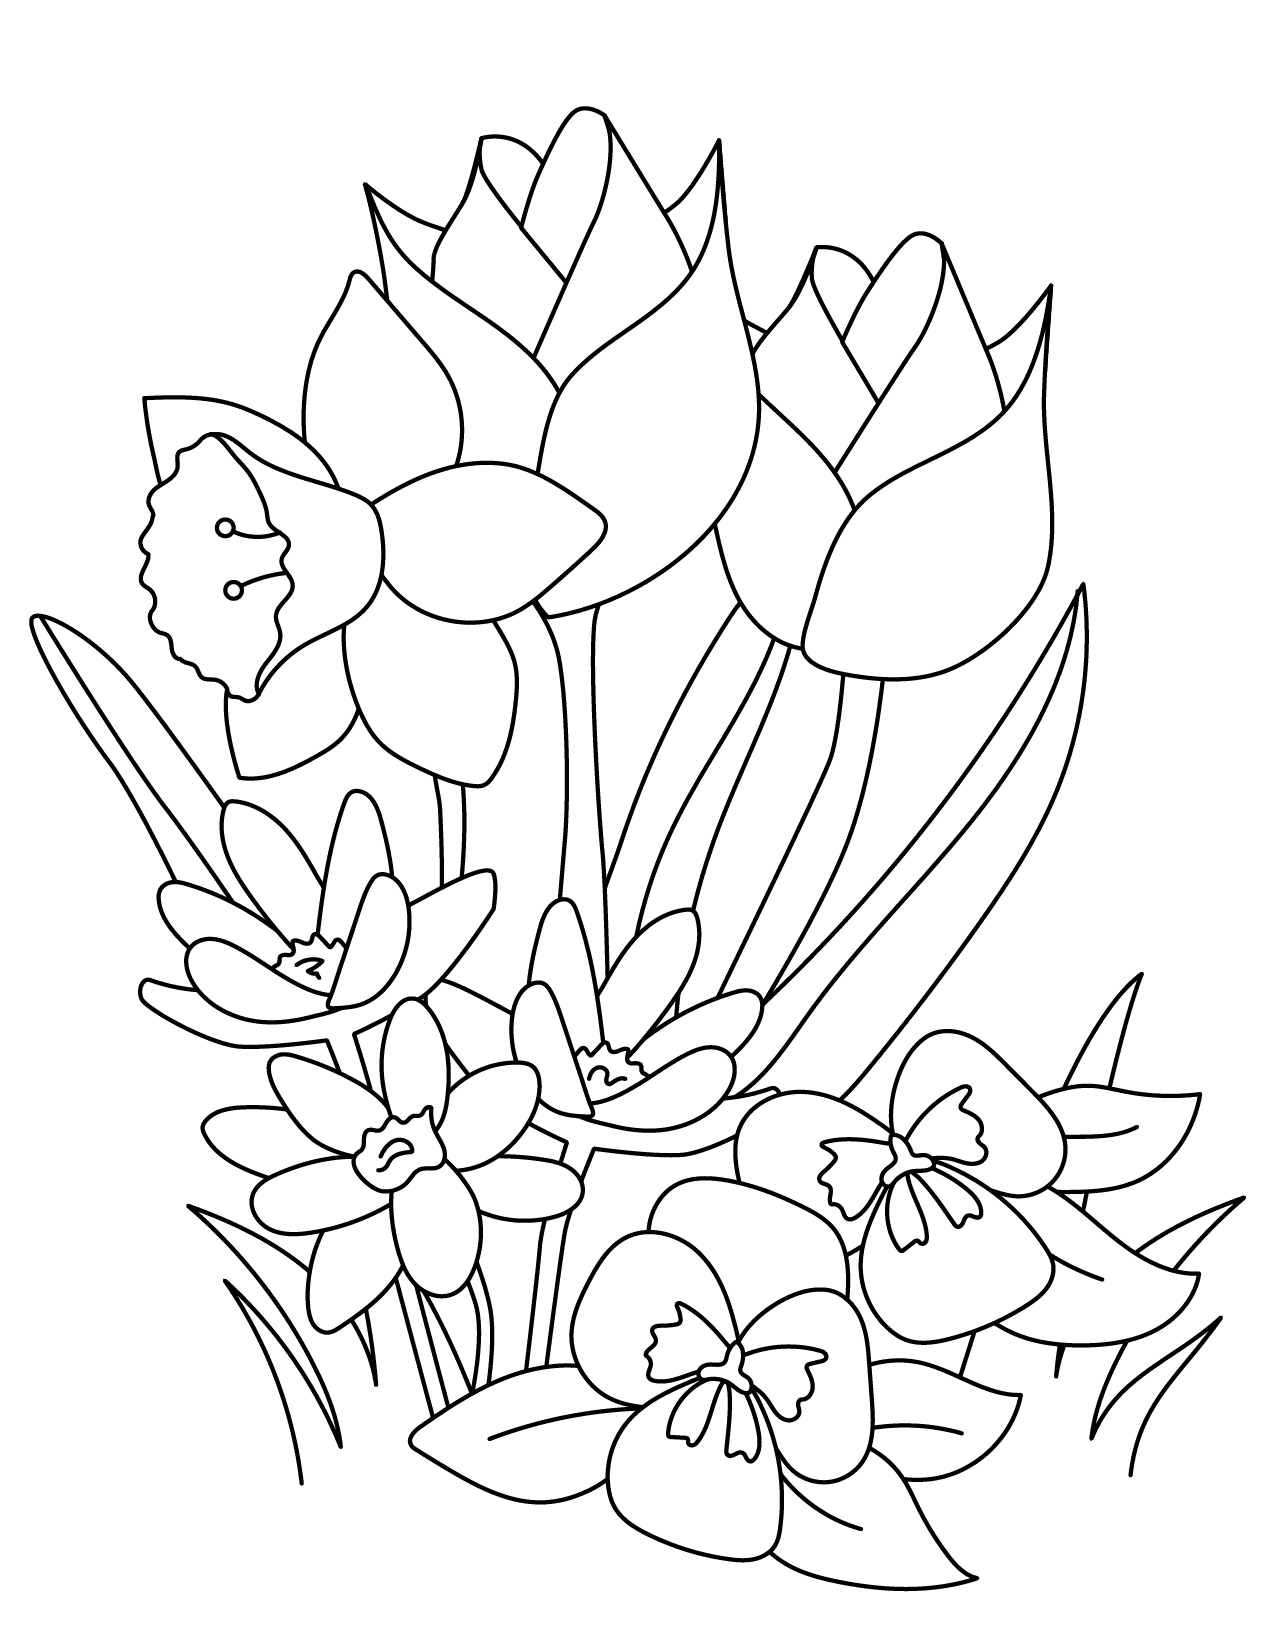 Field of Flowers Coloring Page for Teens